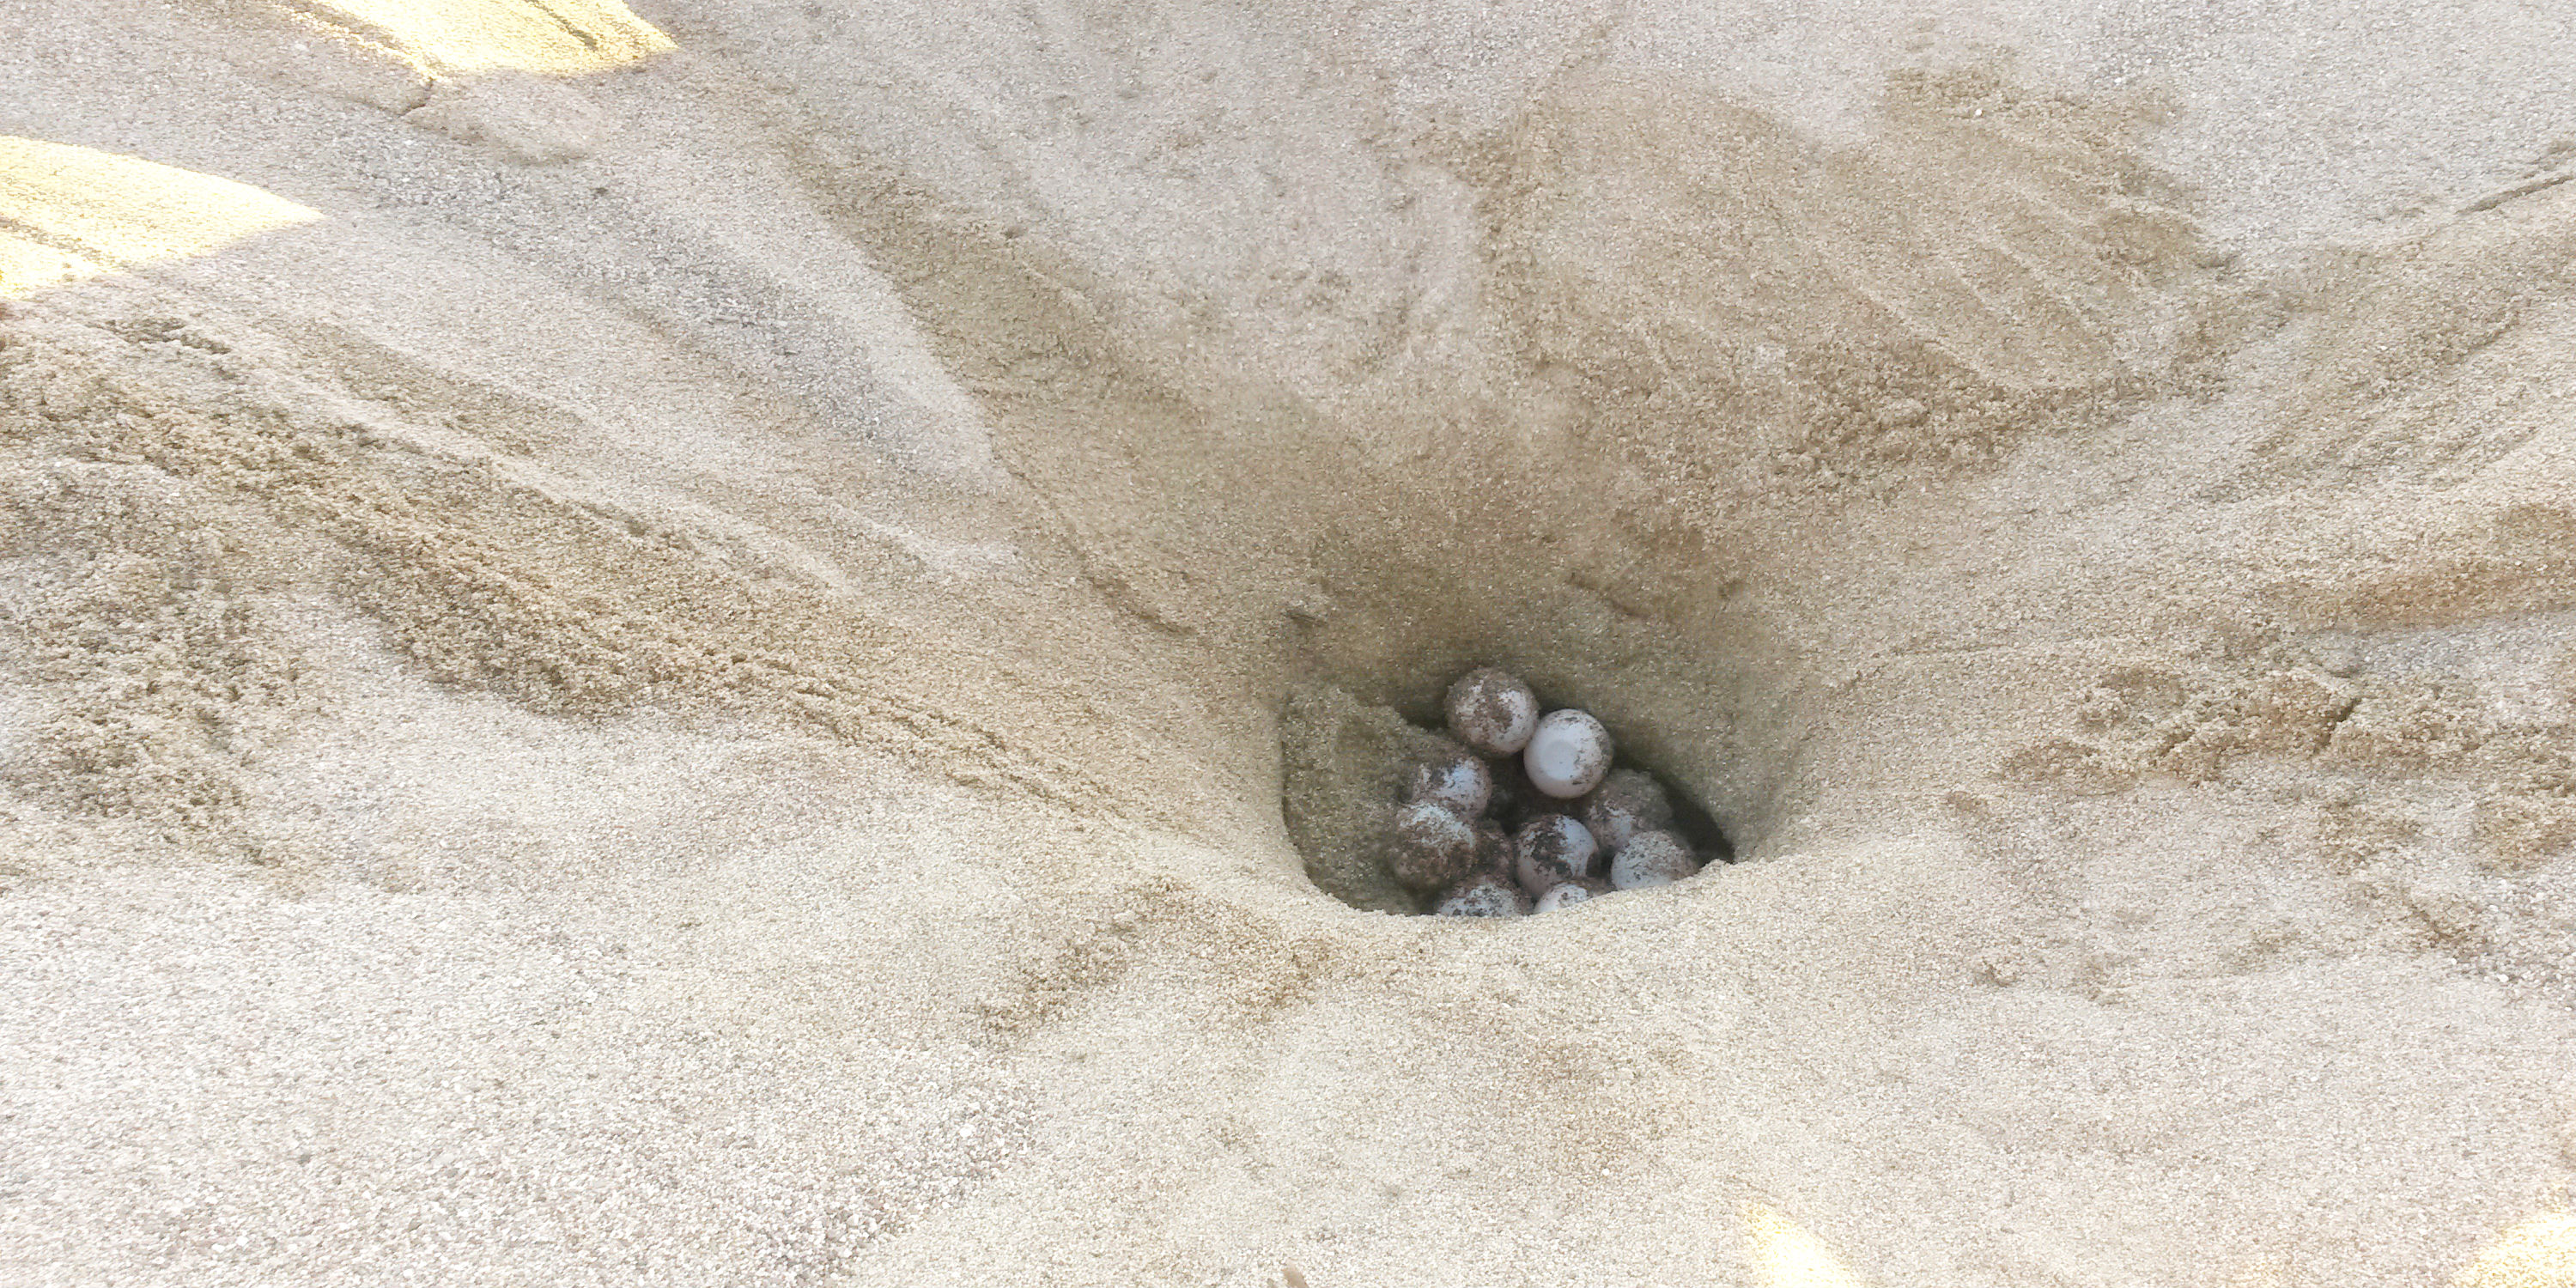 A next of endangered green sea turtle eggs is a priority for a wildlife conservation officer in the Seychelles archipelago. 